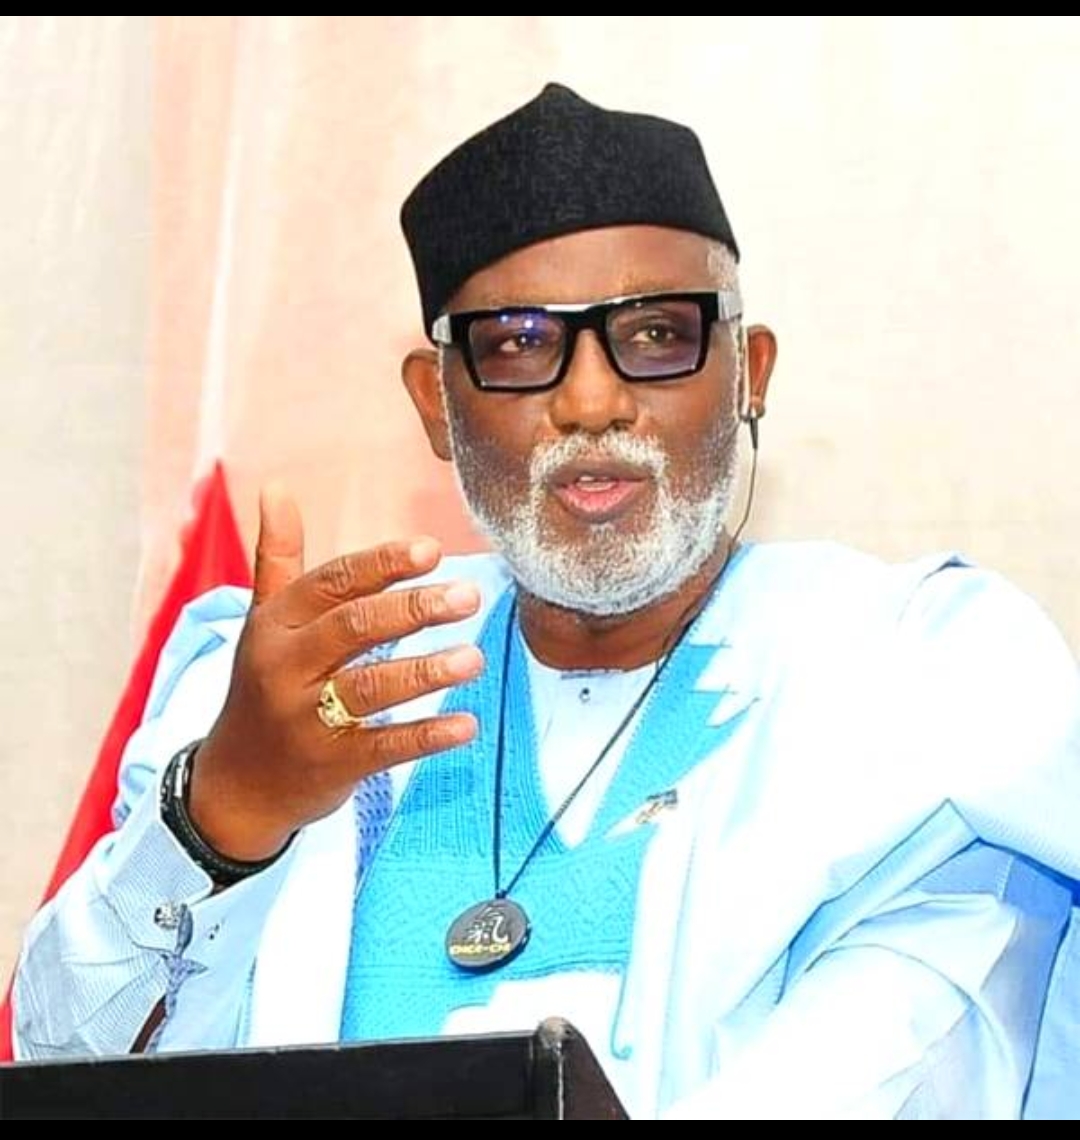 Southern Governors Cannot Any Party Fielding Northerner For Presidency In 2023 — Akeredolu